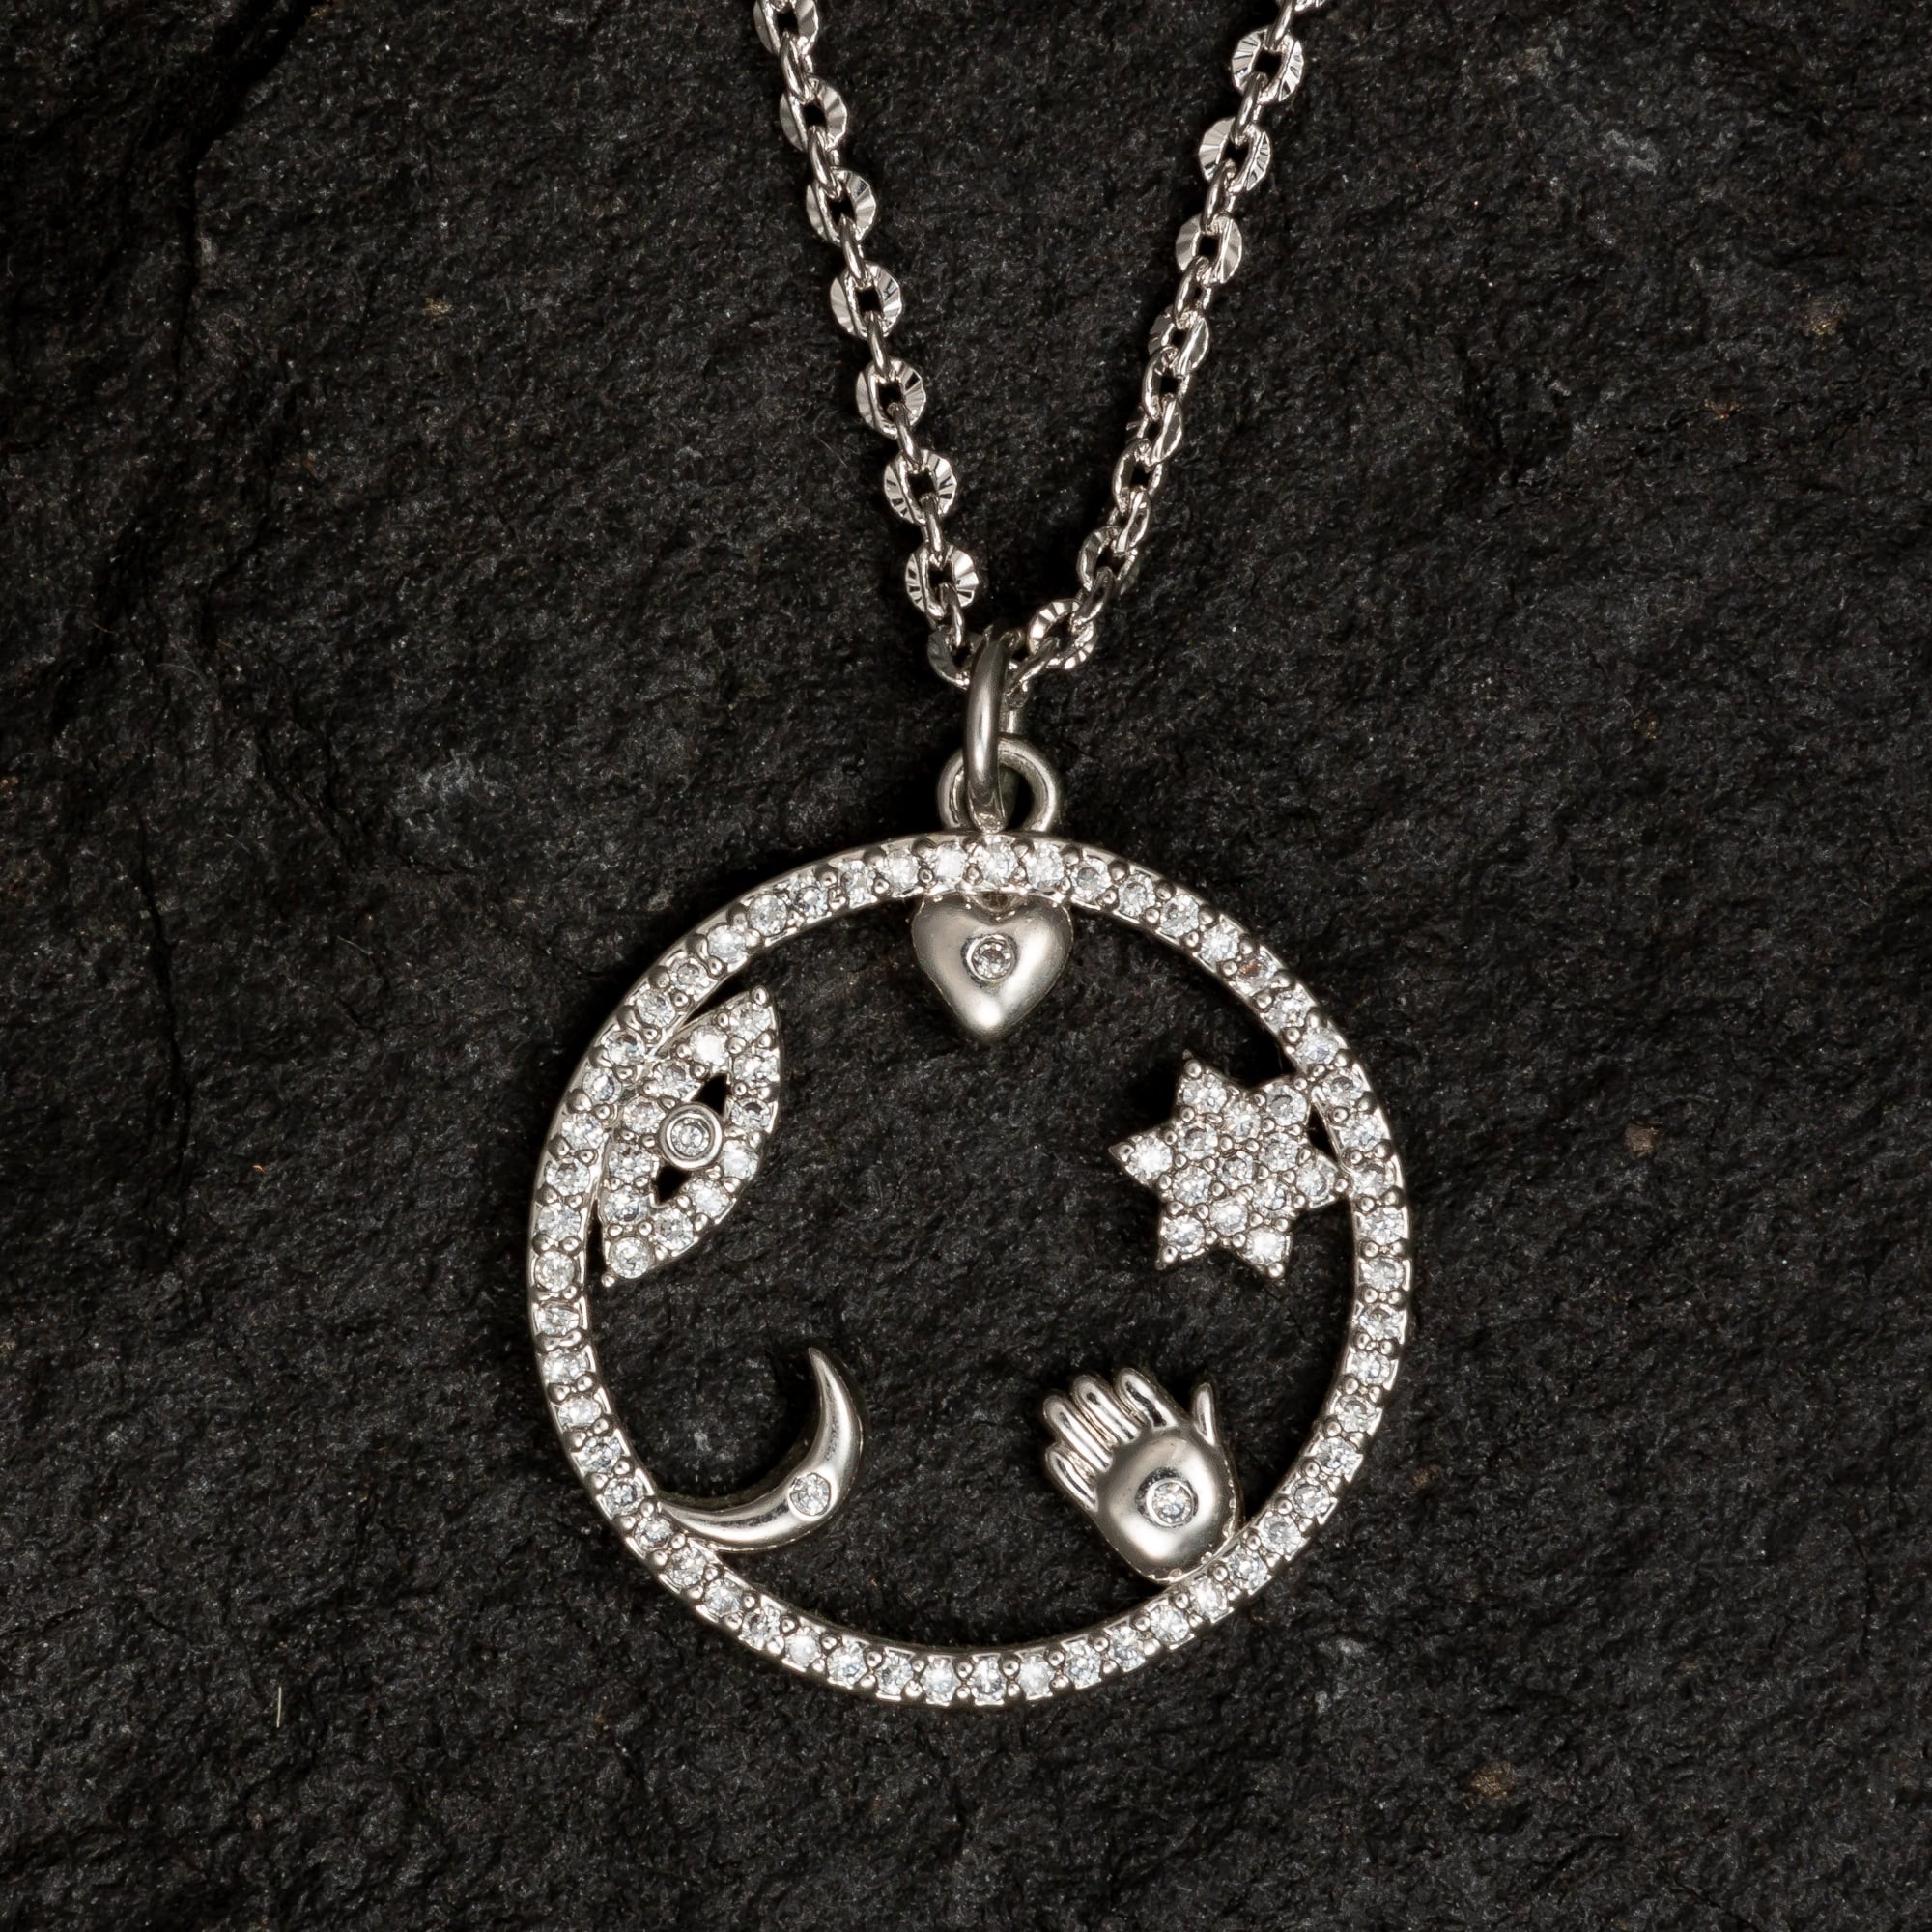 Circle of Protection Necklace with Gemstones - Necklaces